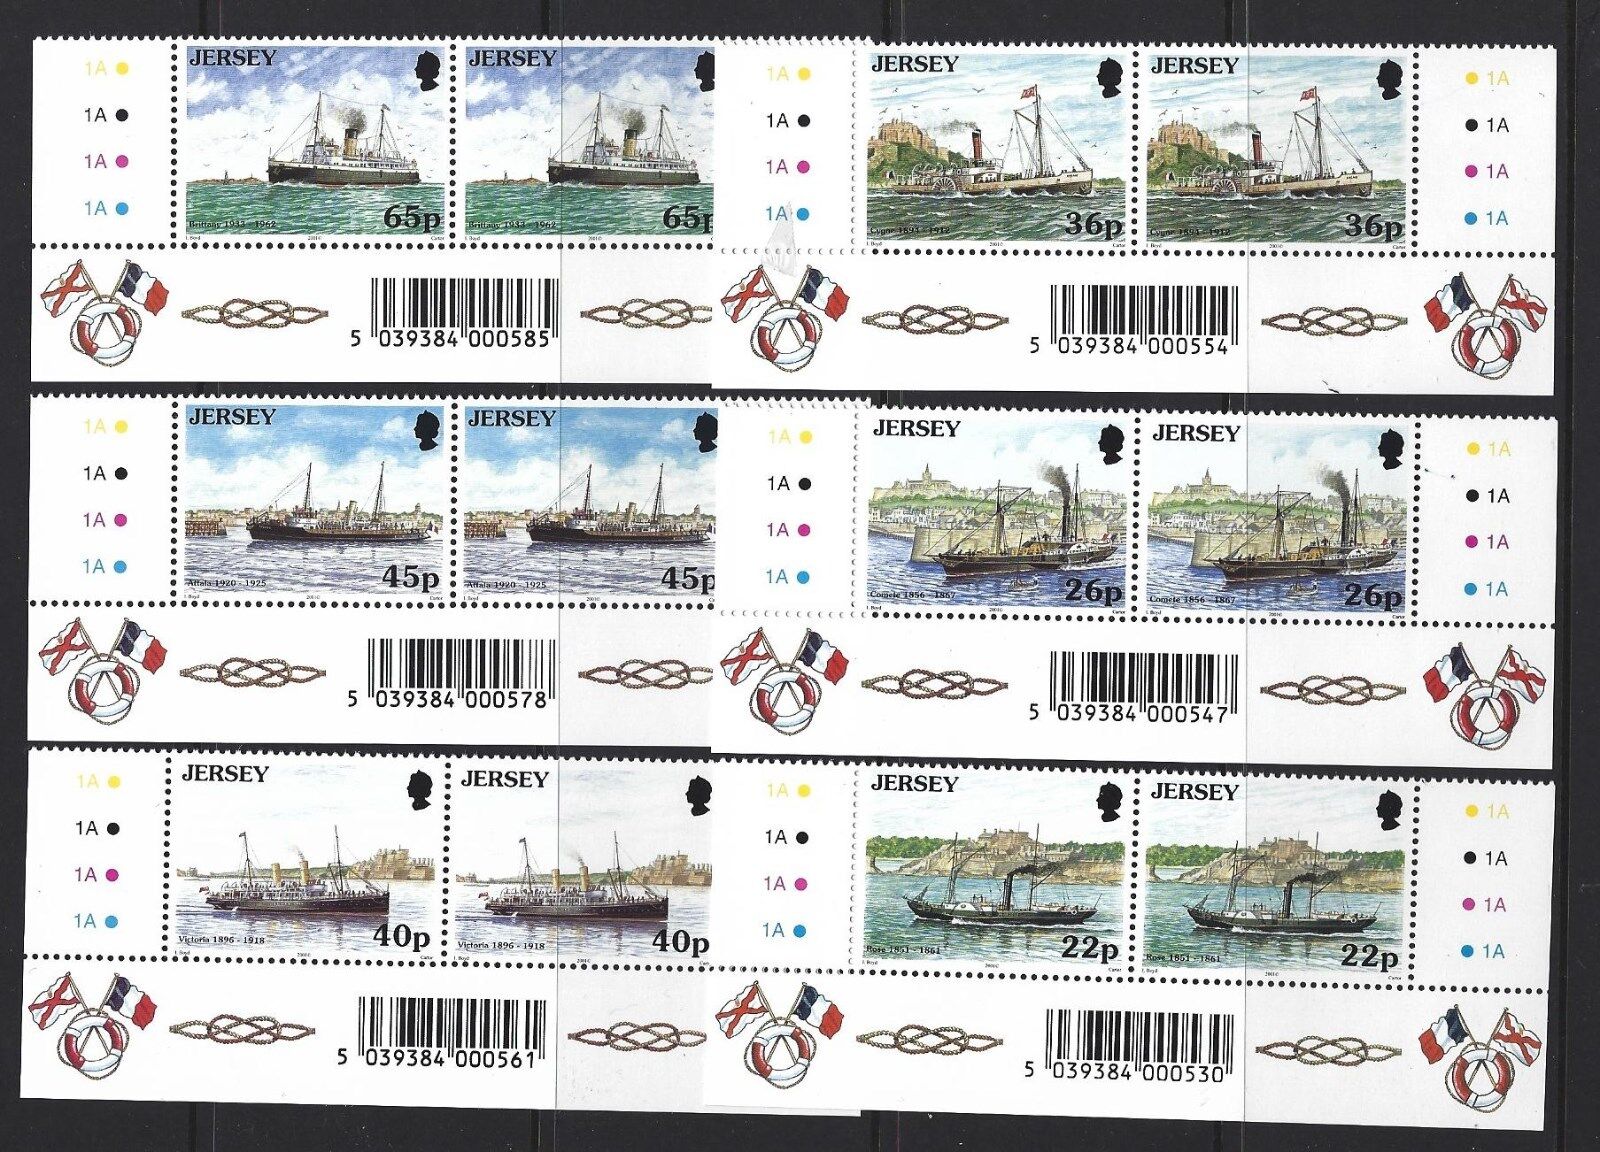 JERSEY 2001 MARITIME LINKS WITH FRANCE MARGINAL PAIRS UNMOUNTED MINT, MNH